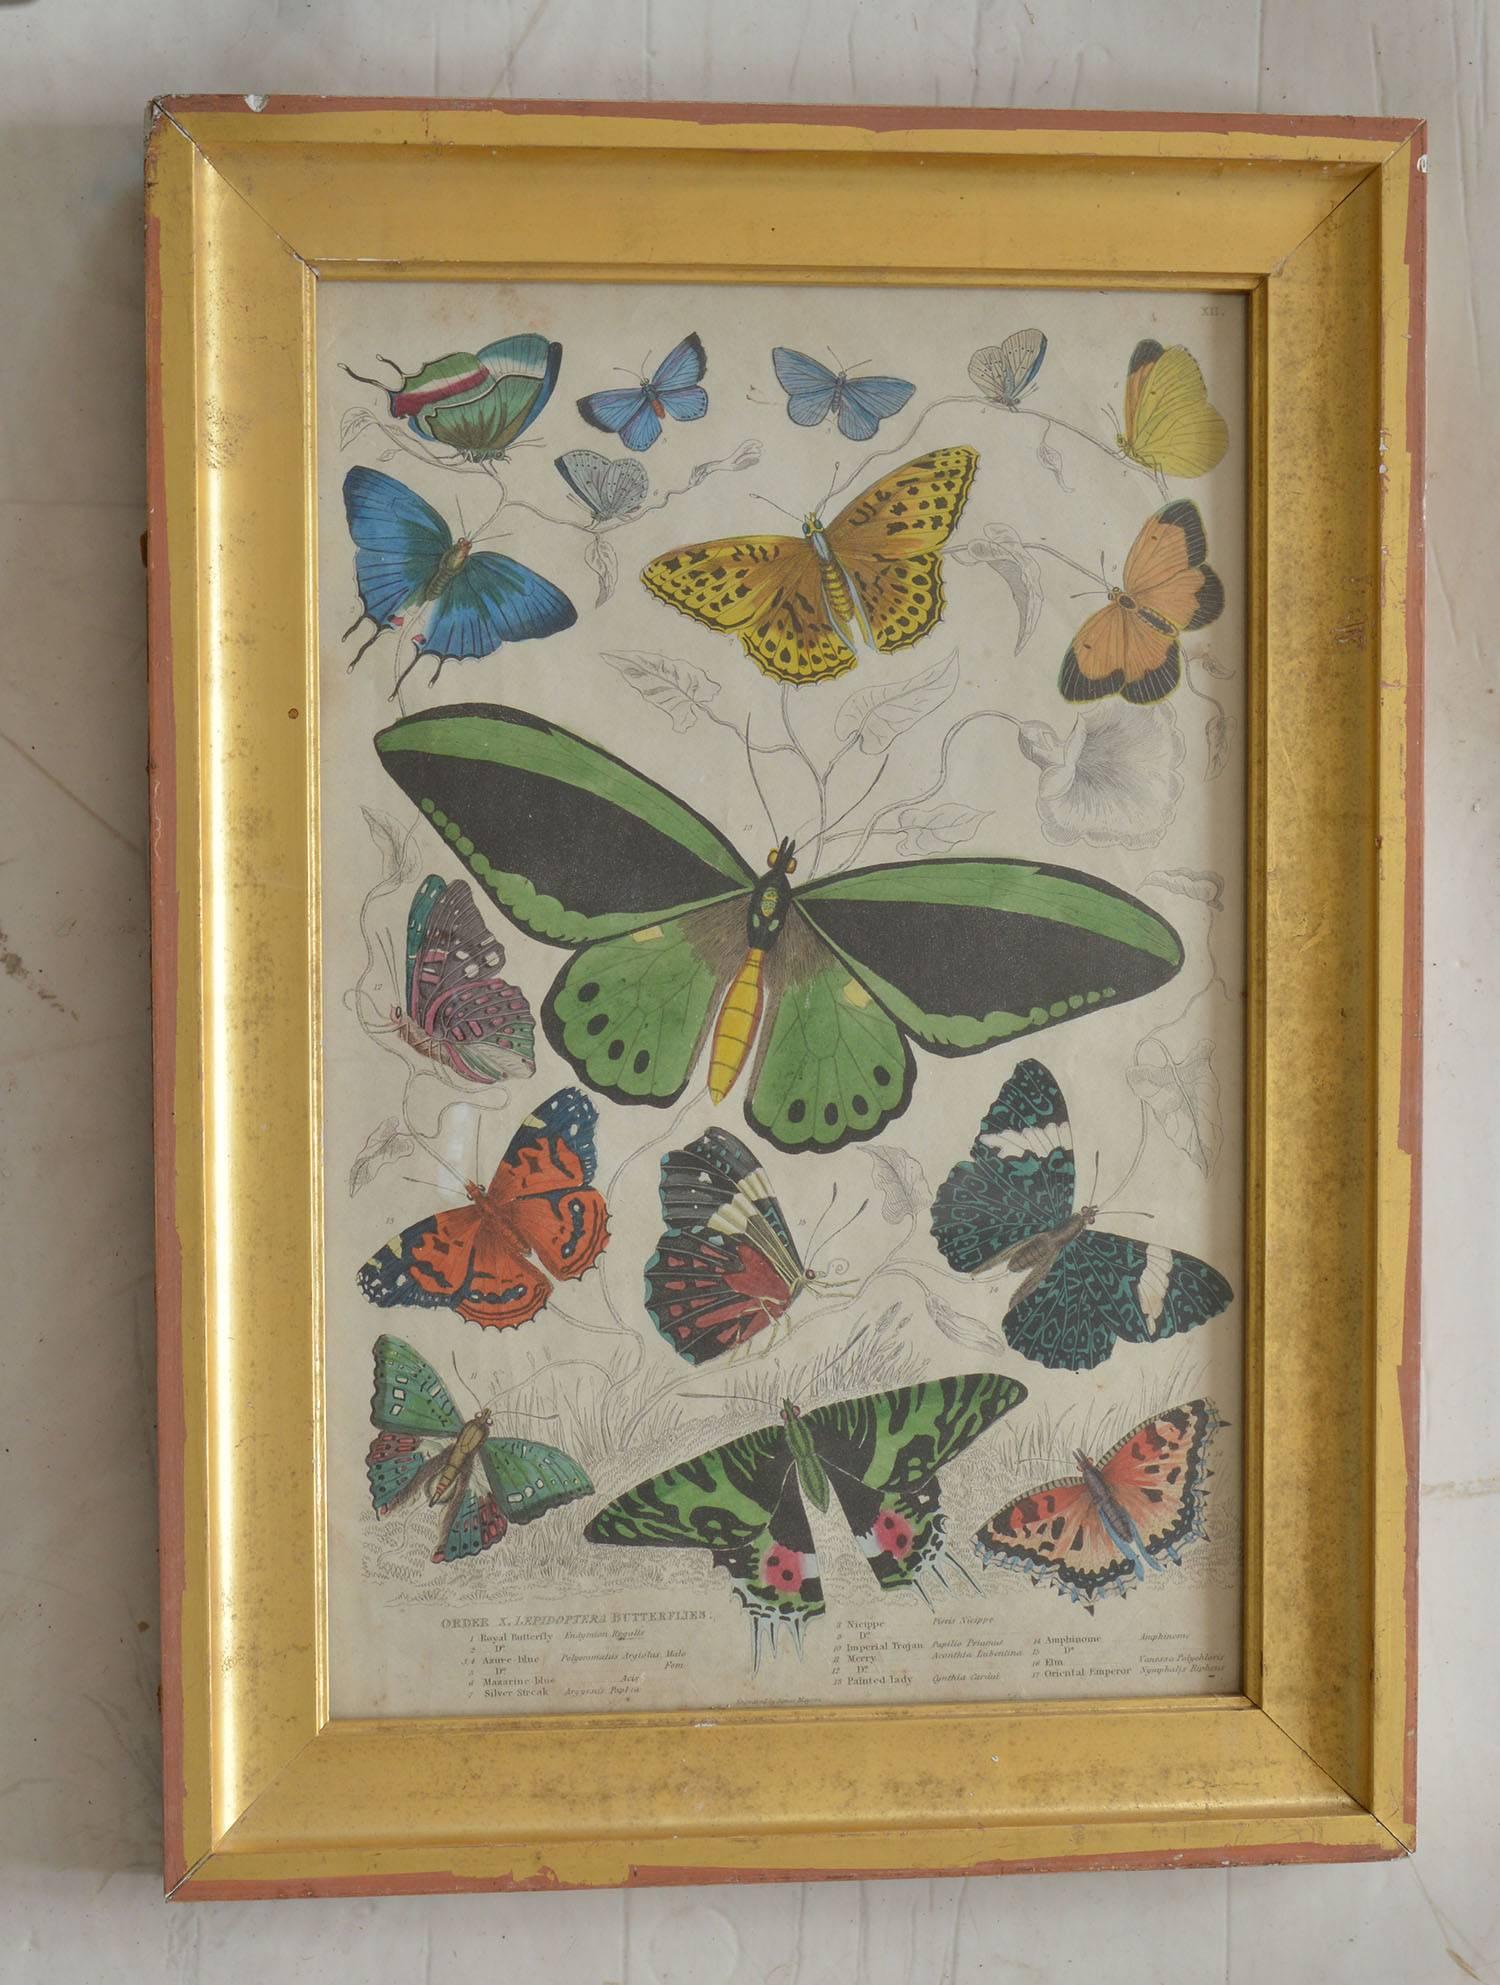 Great image of butterflies.

Hand-colored lithograph.

Original color.

From The Edinburgh Journal of Natural History .

Published by Smith, Elder, 1835

Presented in an antique distressed gilt frame.

The measurement given below is the